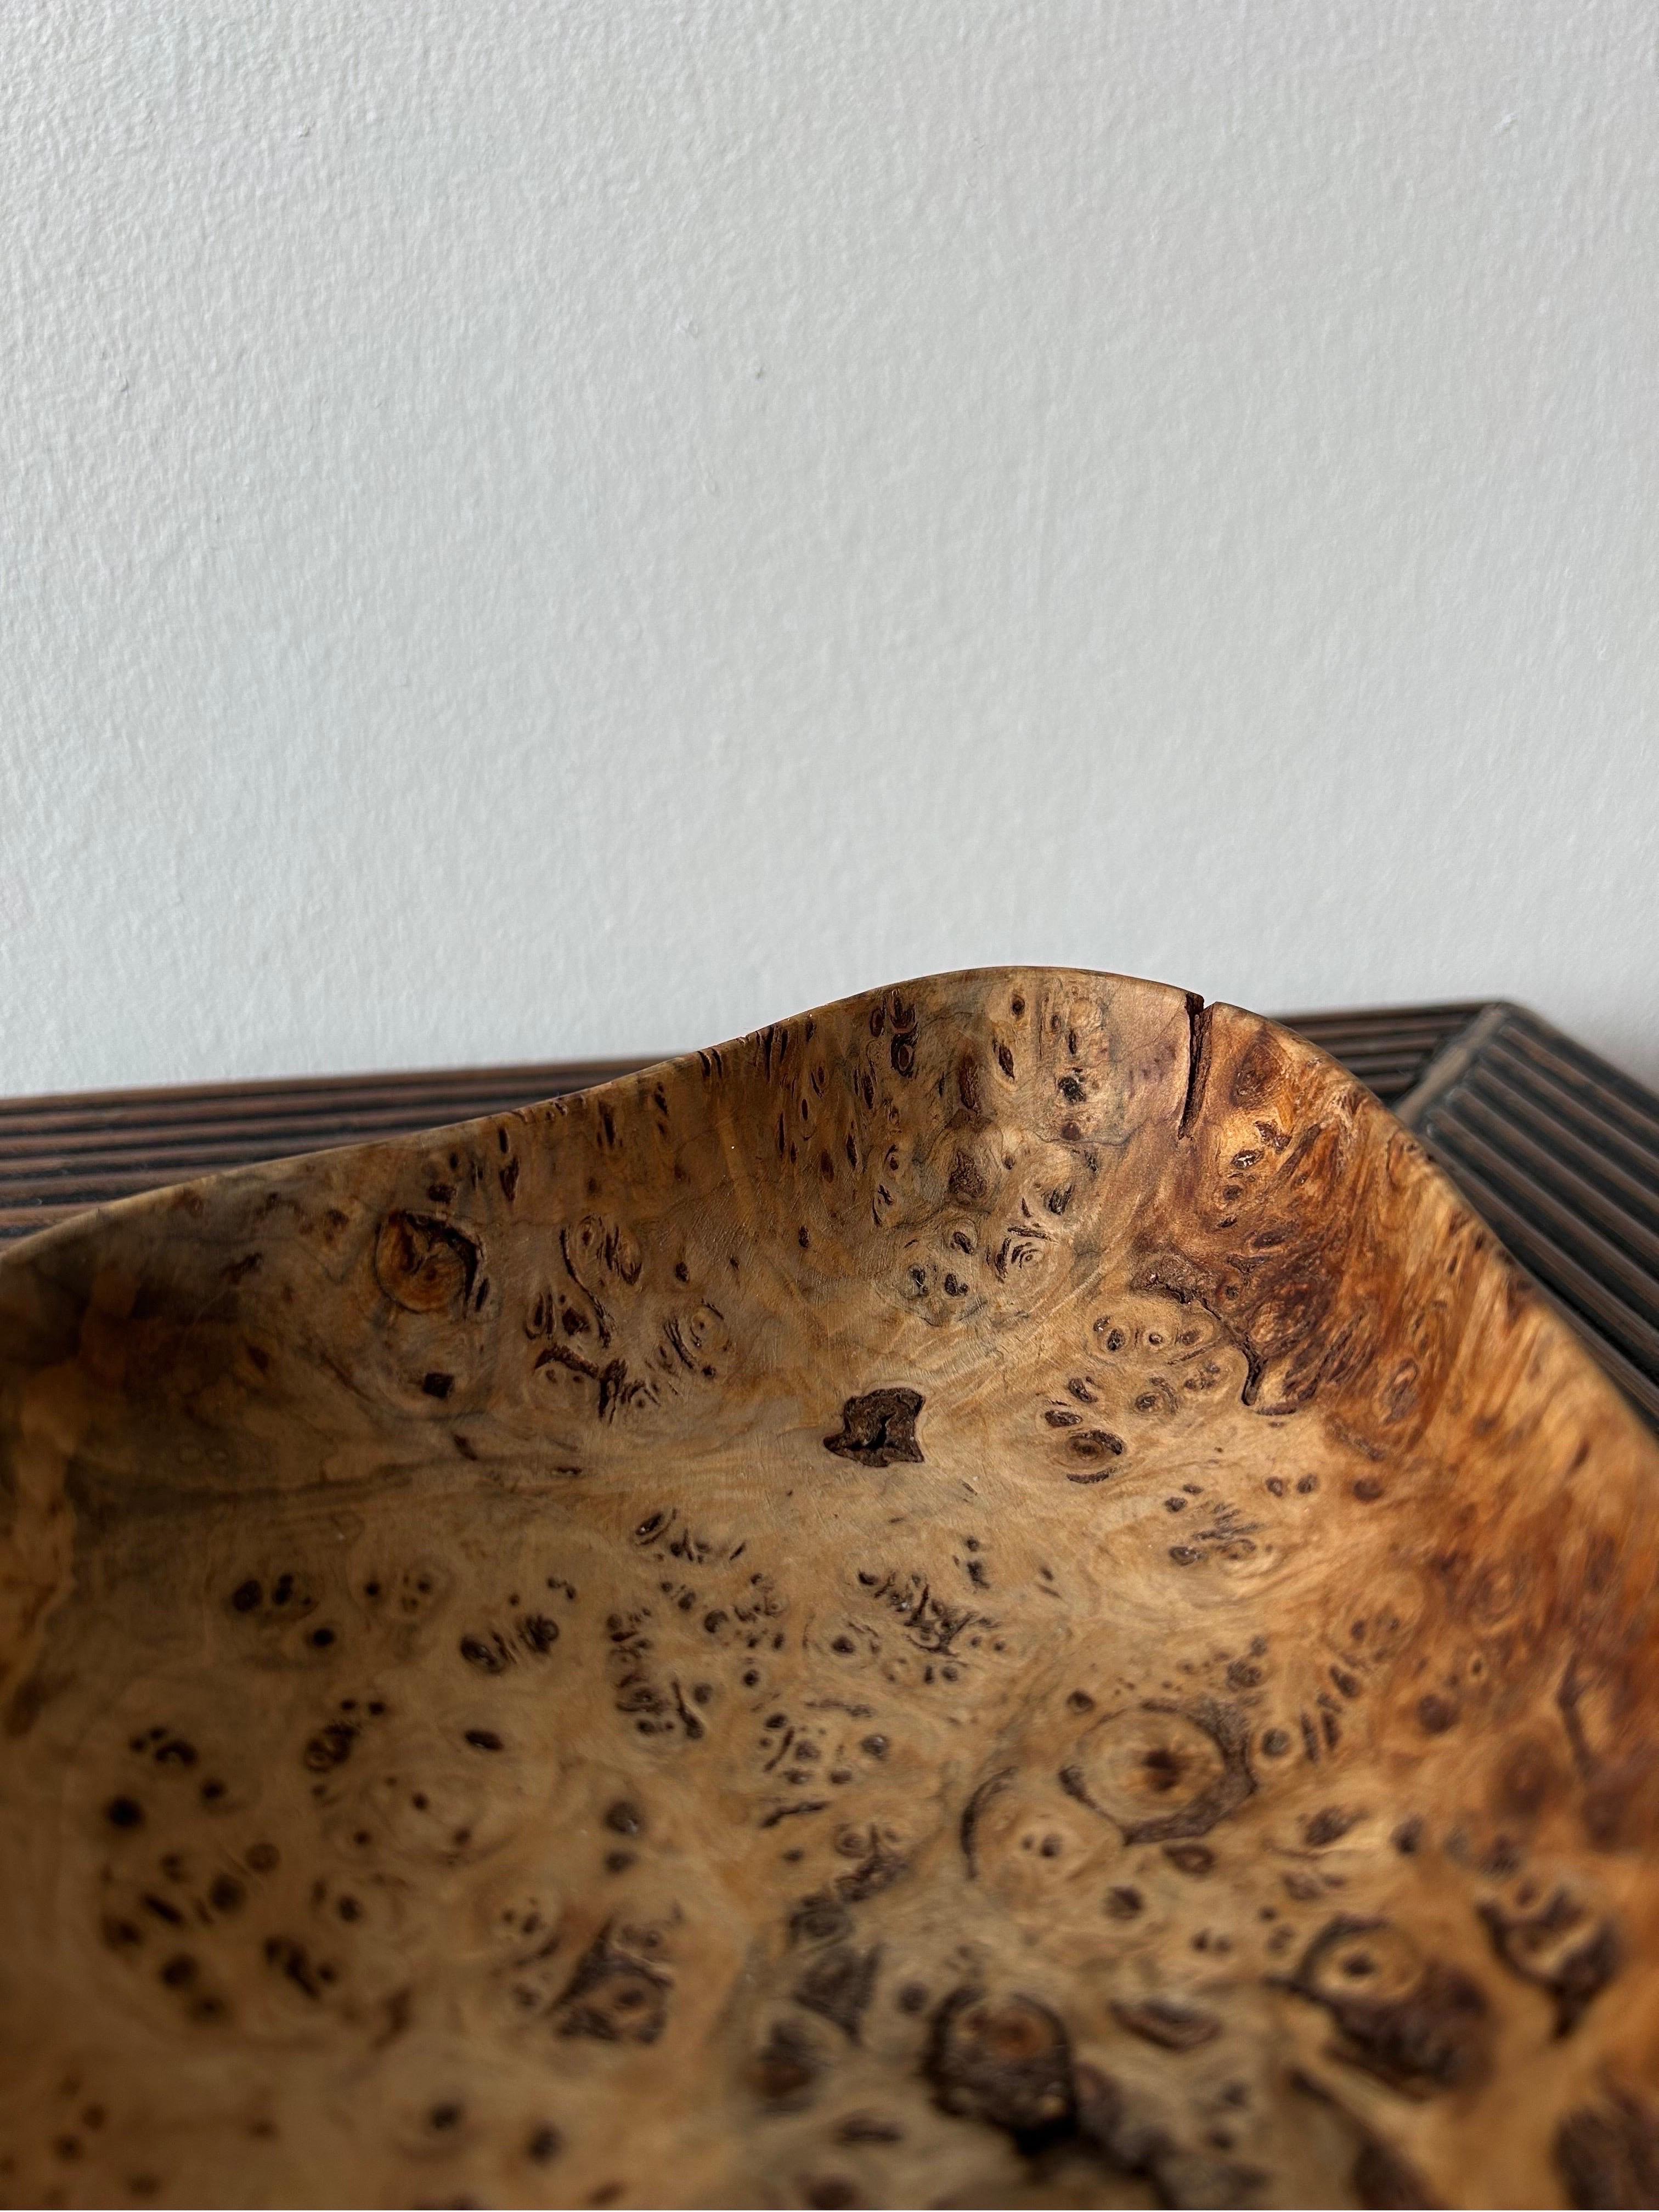 Rare organic wooden bowl made in Sweden in the 1940s in solid Elm root wood.

The bowl is the perfect decorative touch for any interior and can be used for things like nuts or just as a decorative object in your interior.

The bowl is very